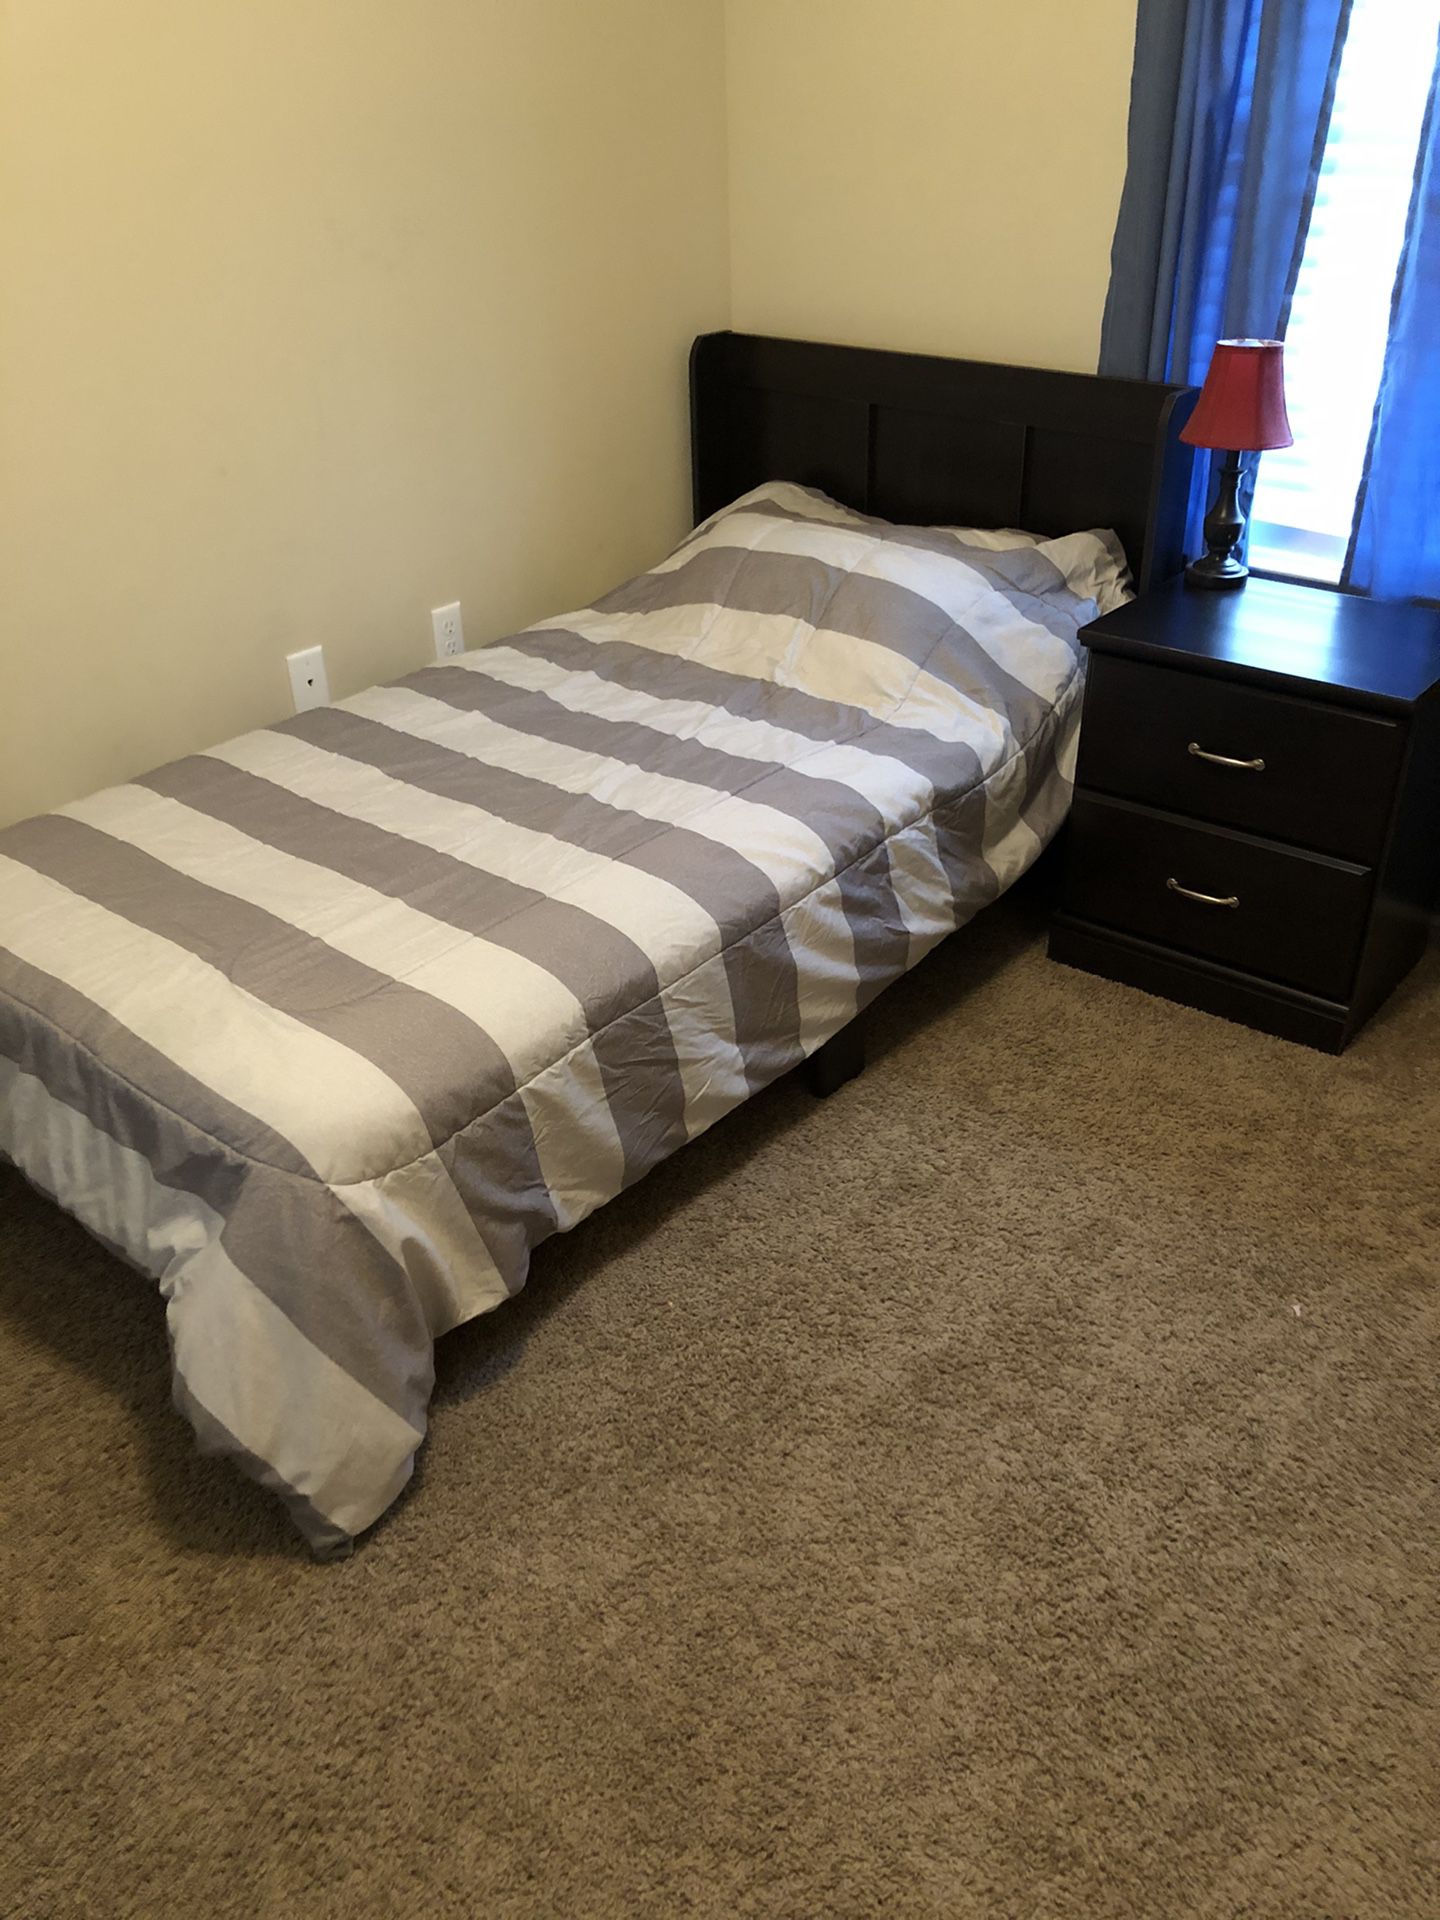 Twin bed and side table